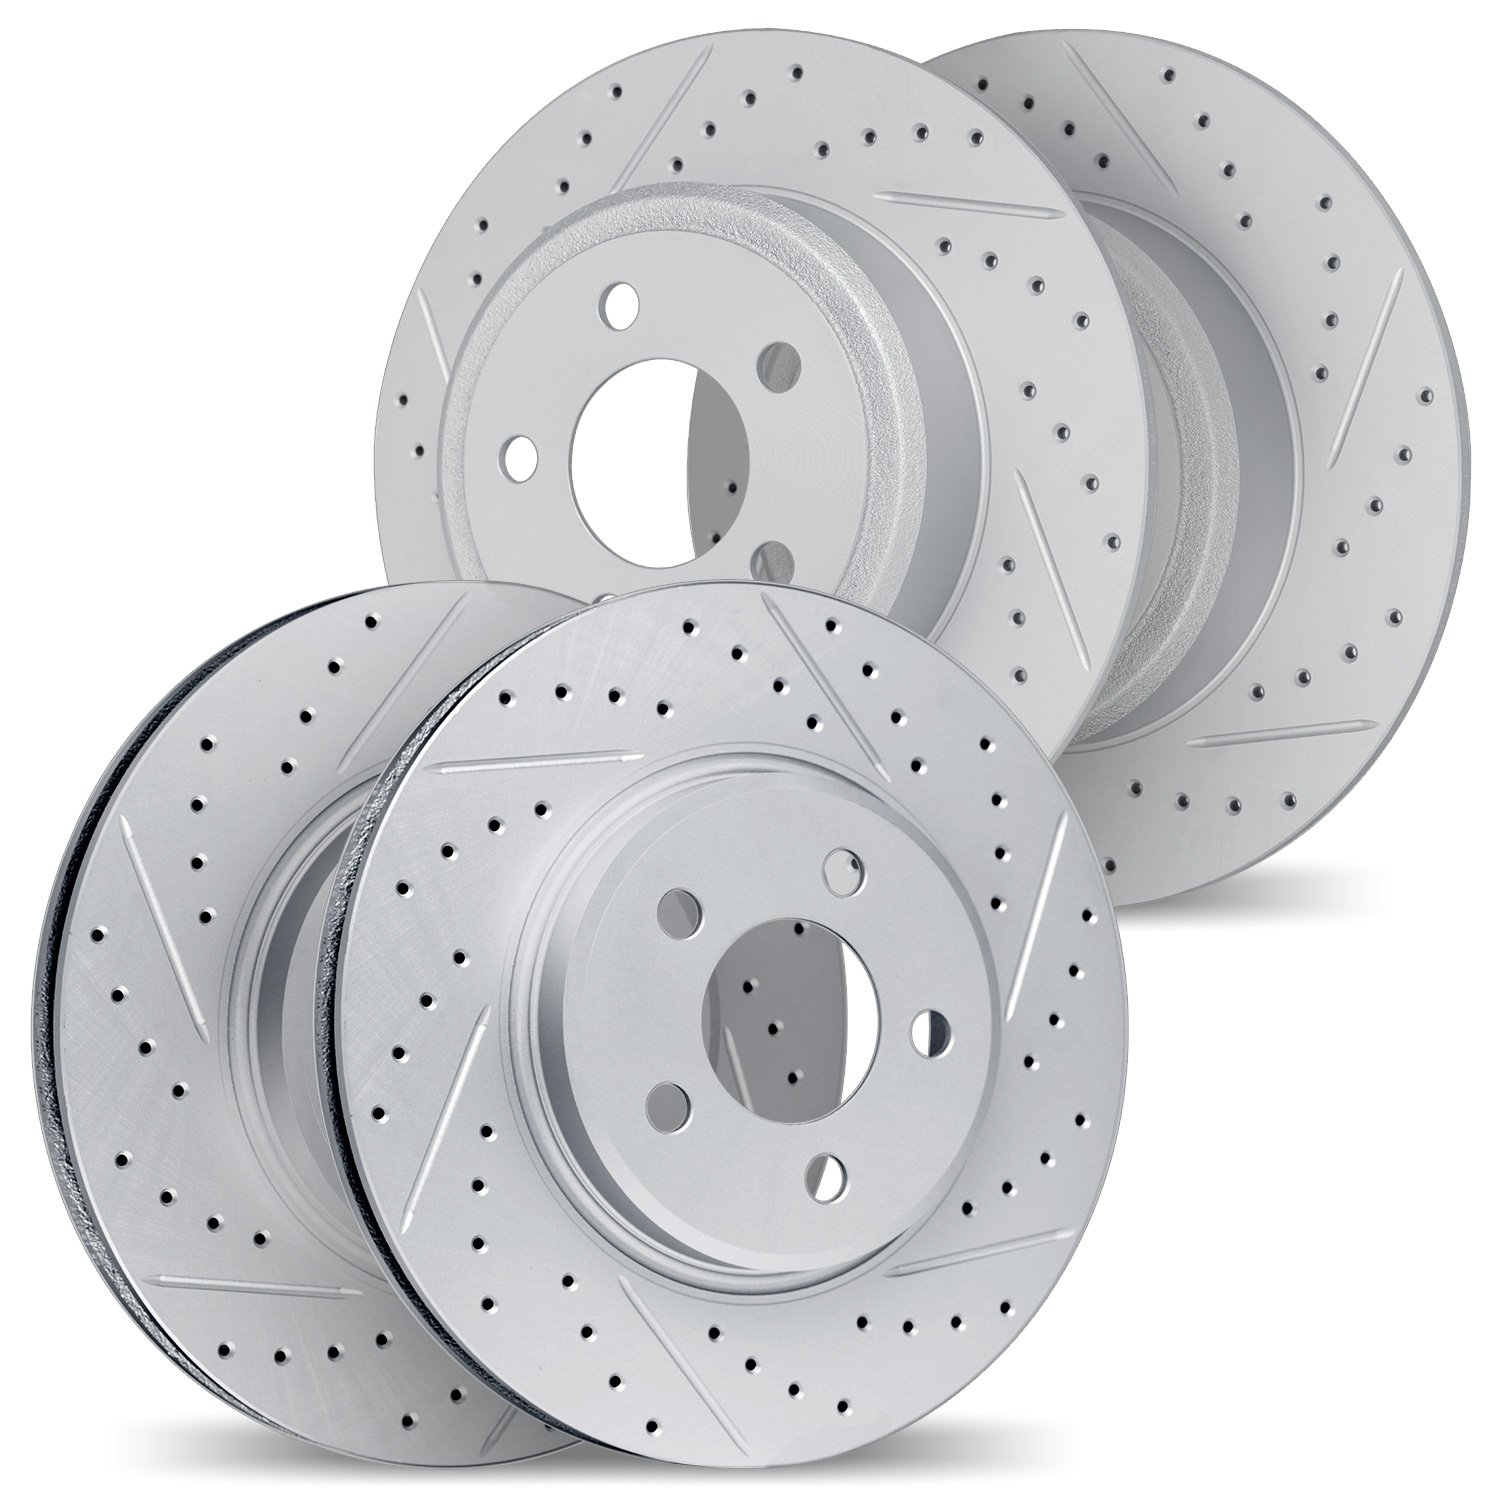 2004-58018 Geoperformance Drilled/Slotted Brake Rotors, 2003-2011 Acura/Honda, Position: Front and Rear